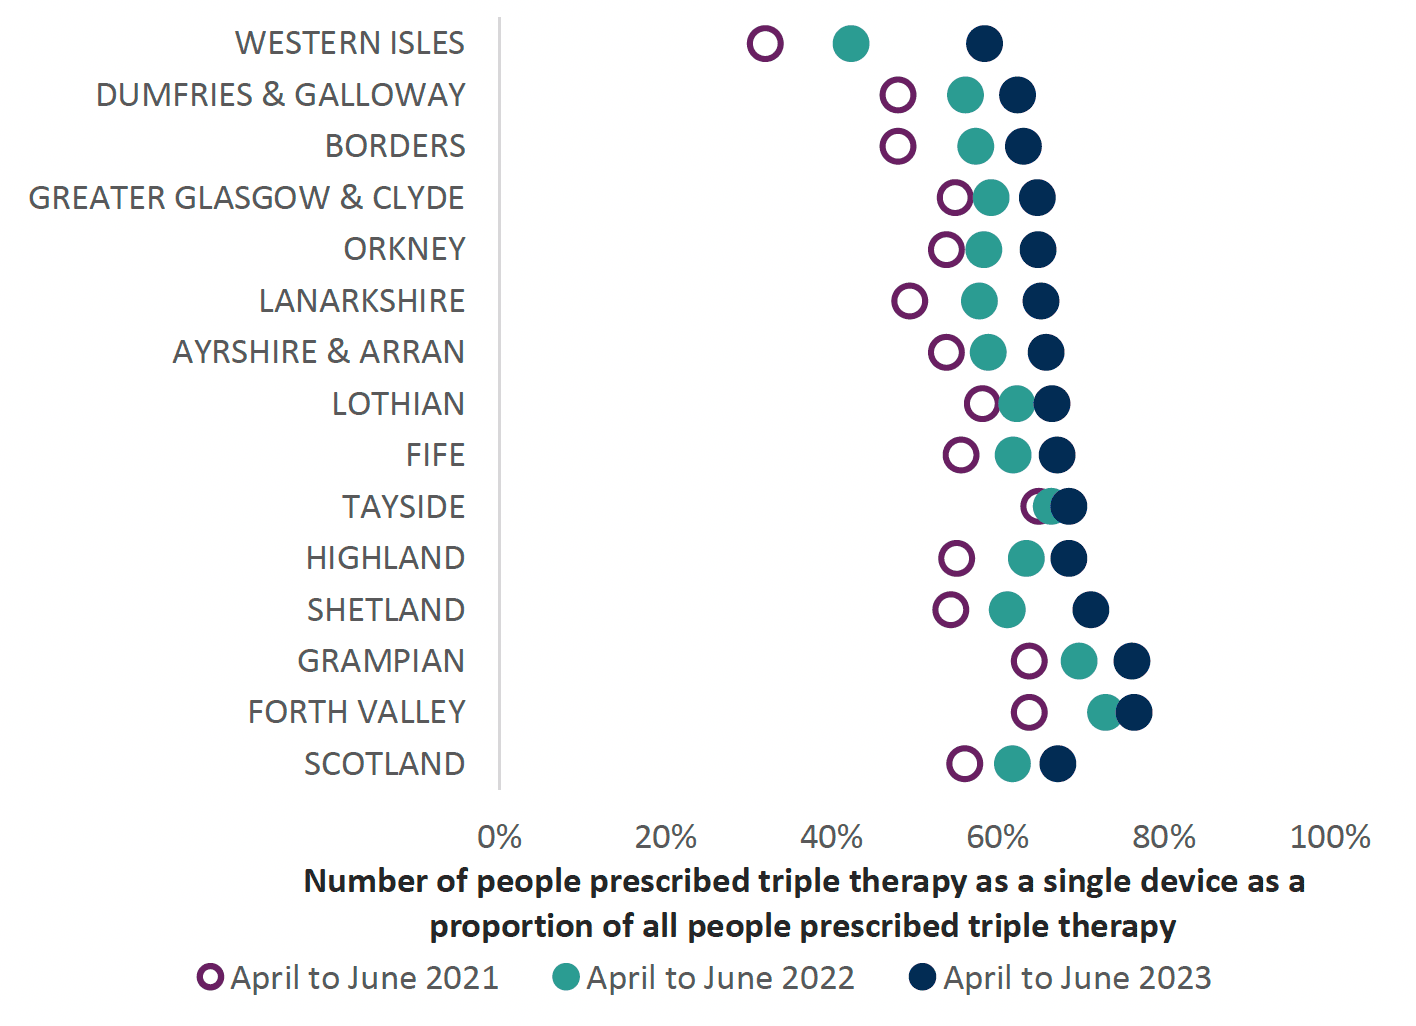 Chart showing variance of people prescribed triple therapy as a single device compared to all people prescribed triple therapy across all health boards and Scotland from 2021 to 2023. Overall Scotland trend is increasing